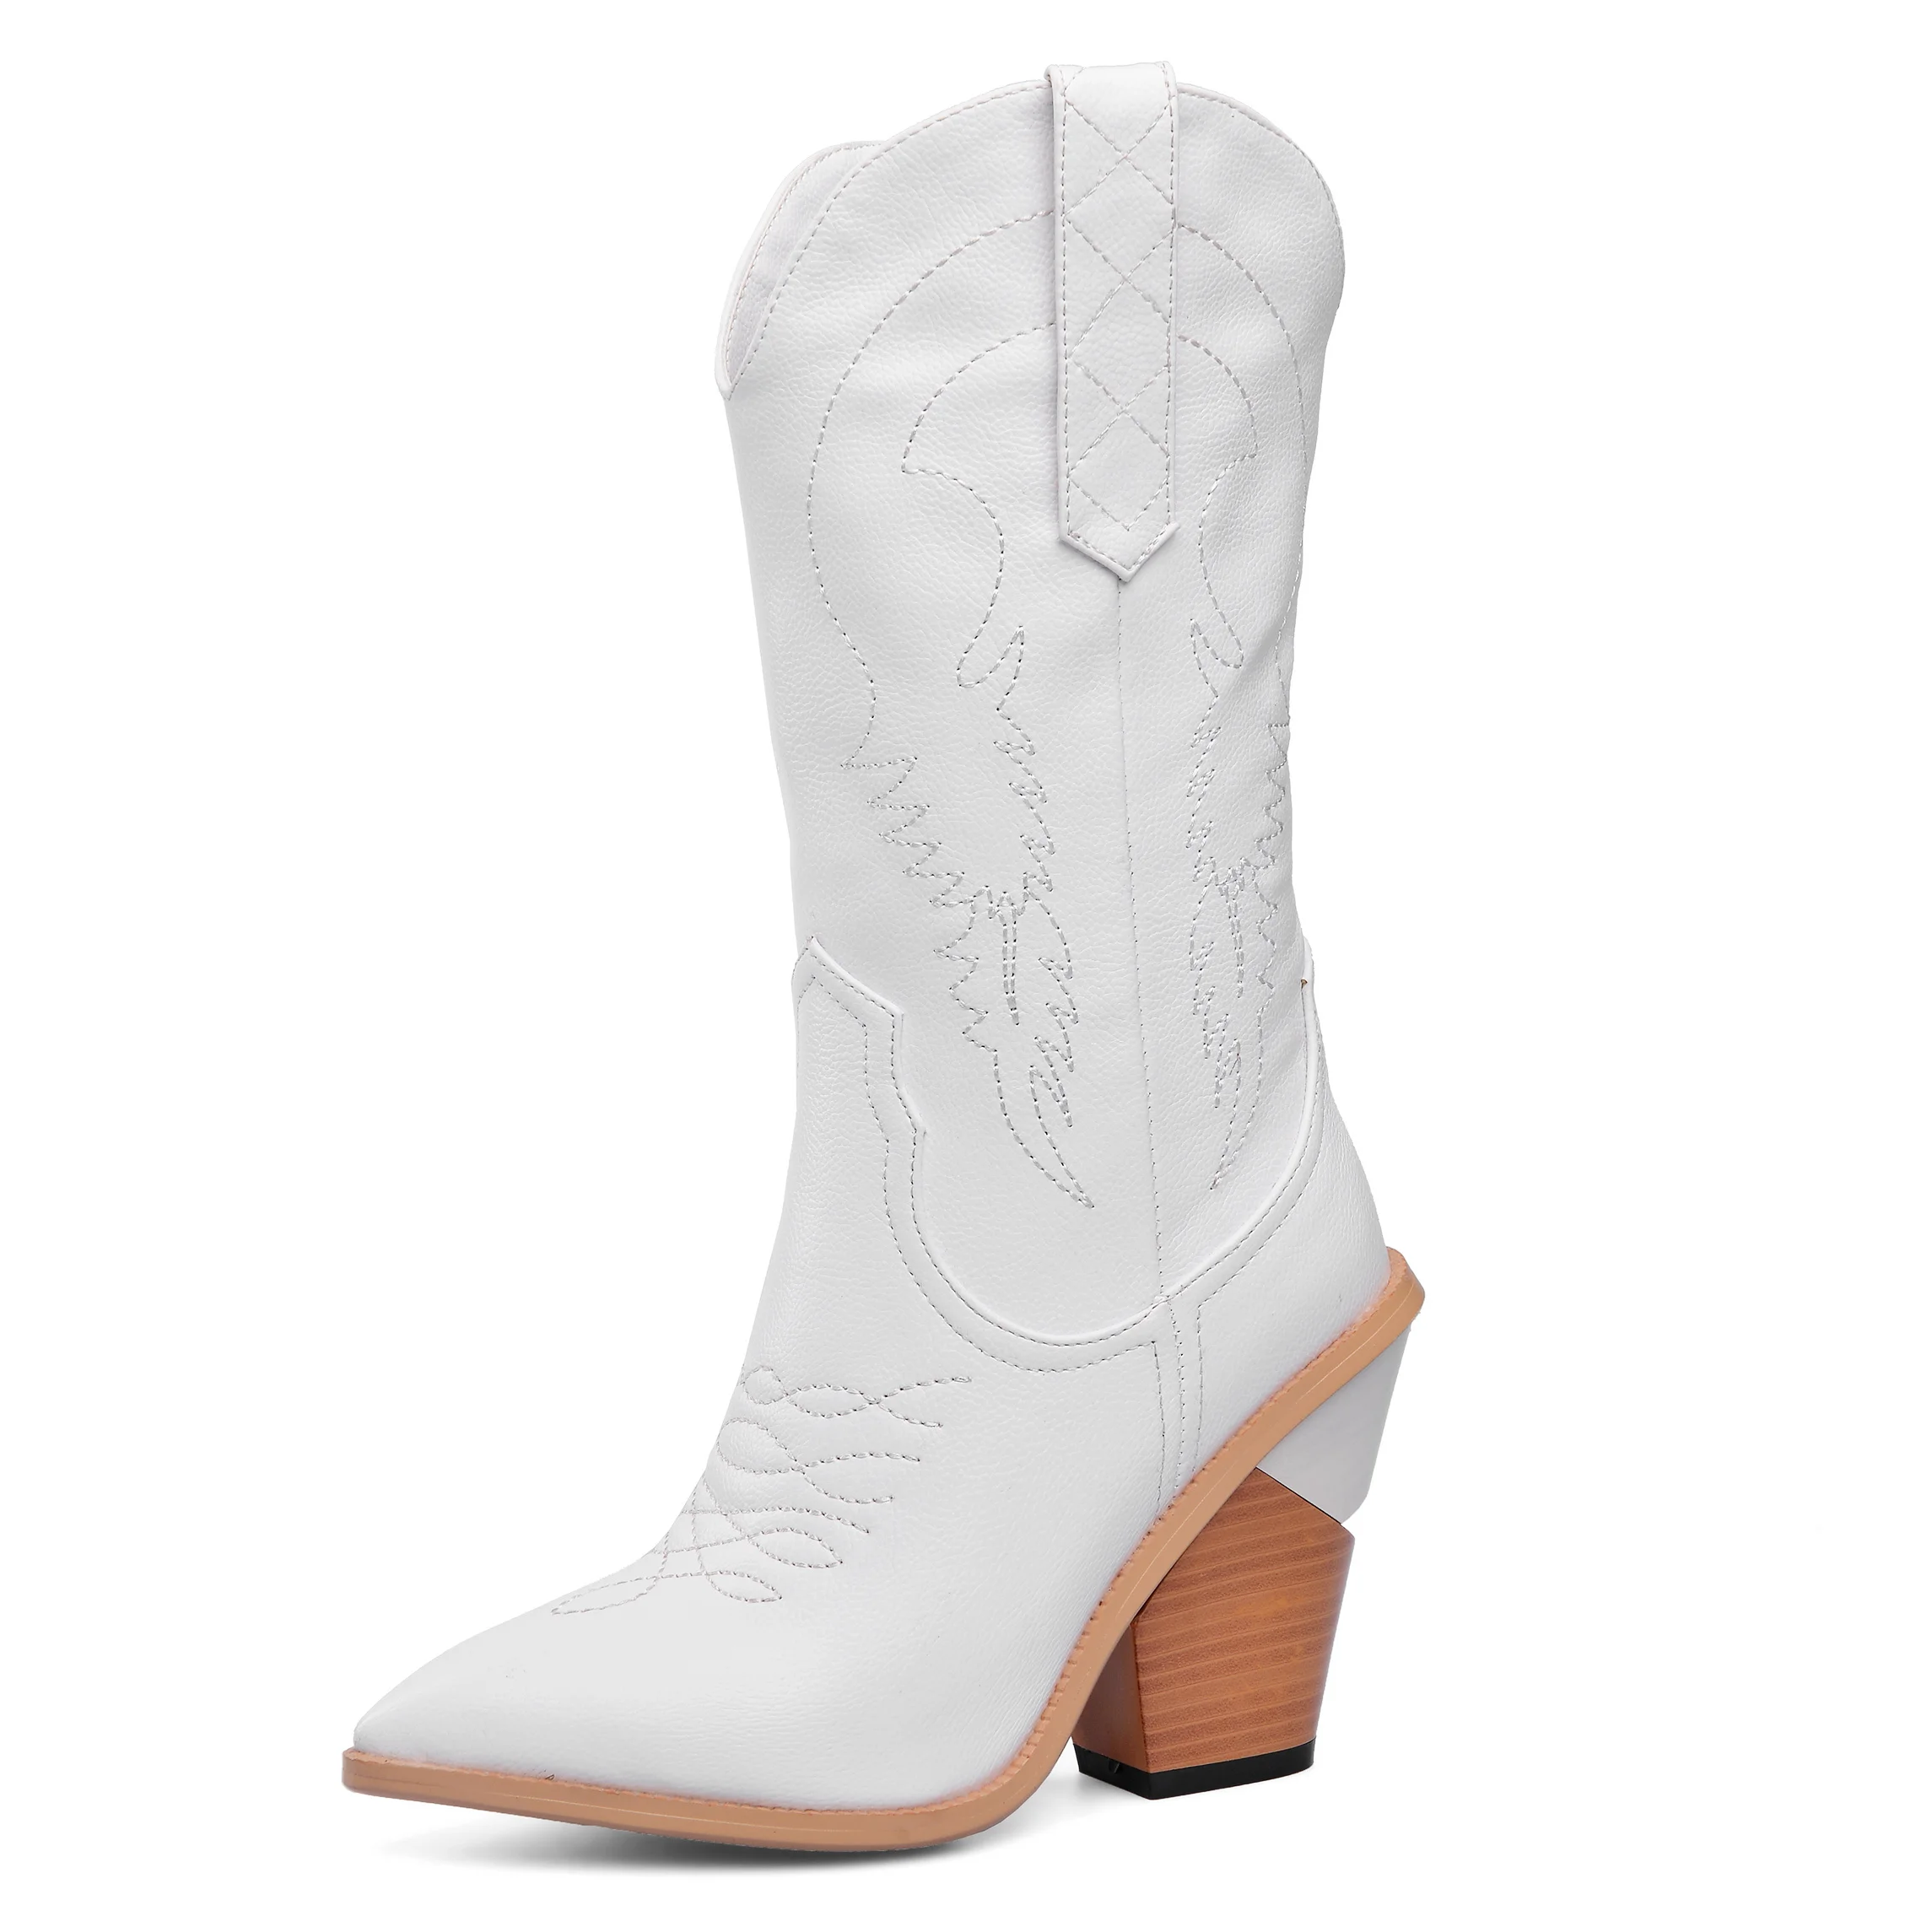 Winter Cowboy Boots for Women Wedge 